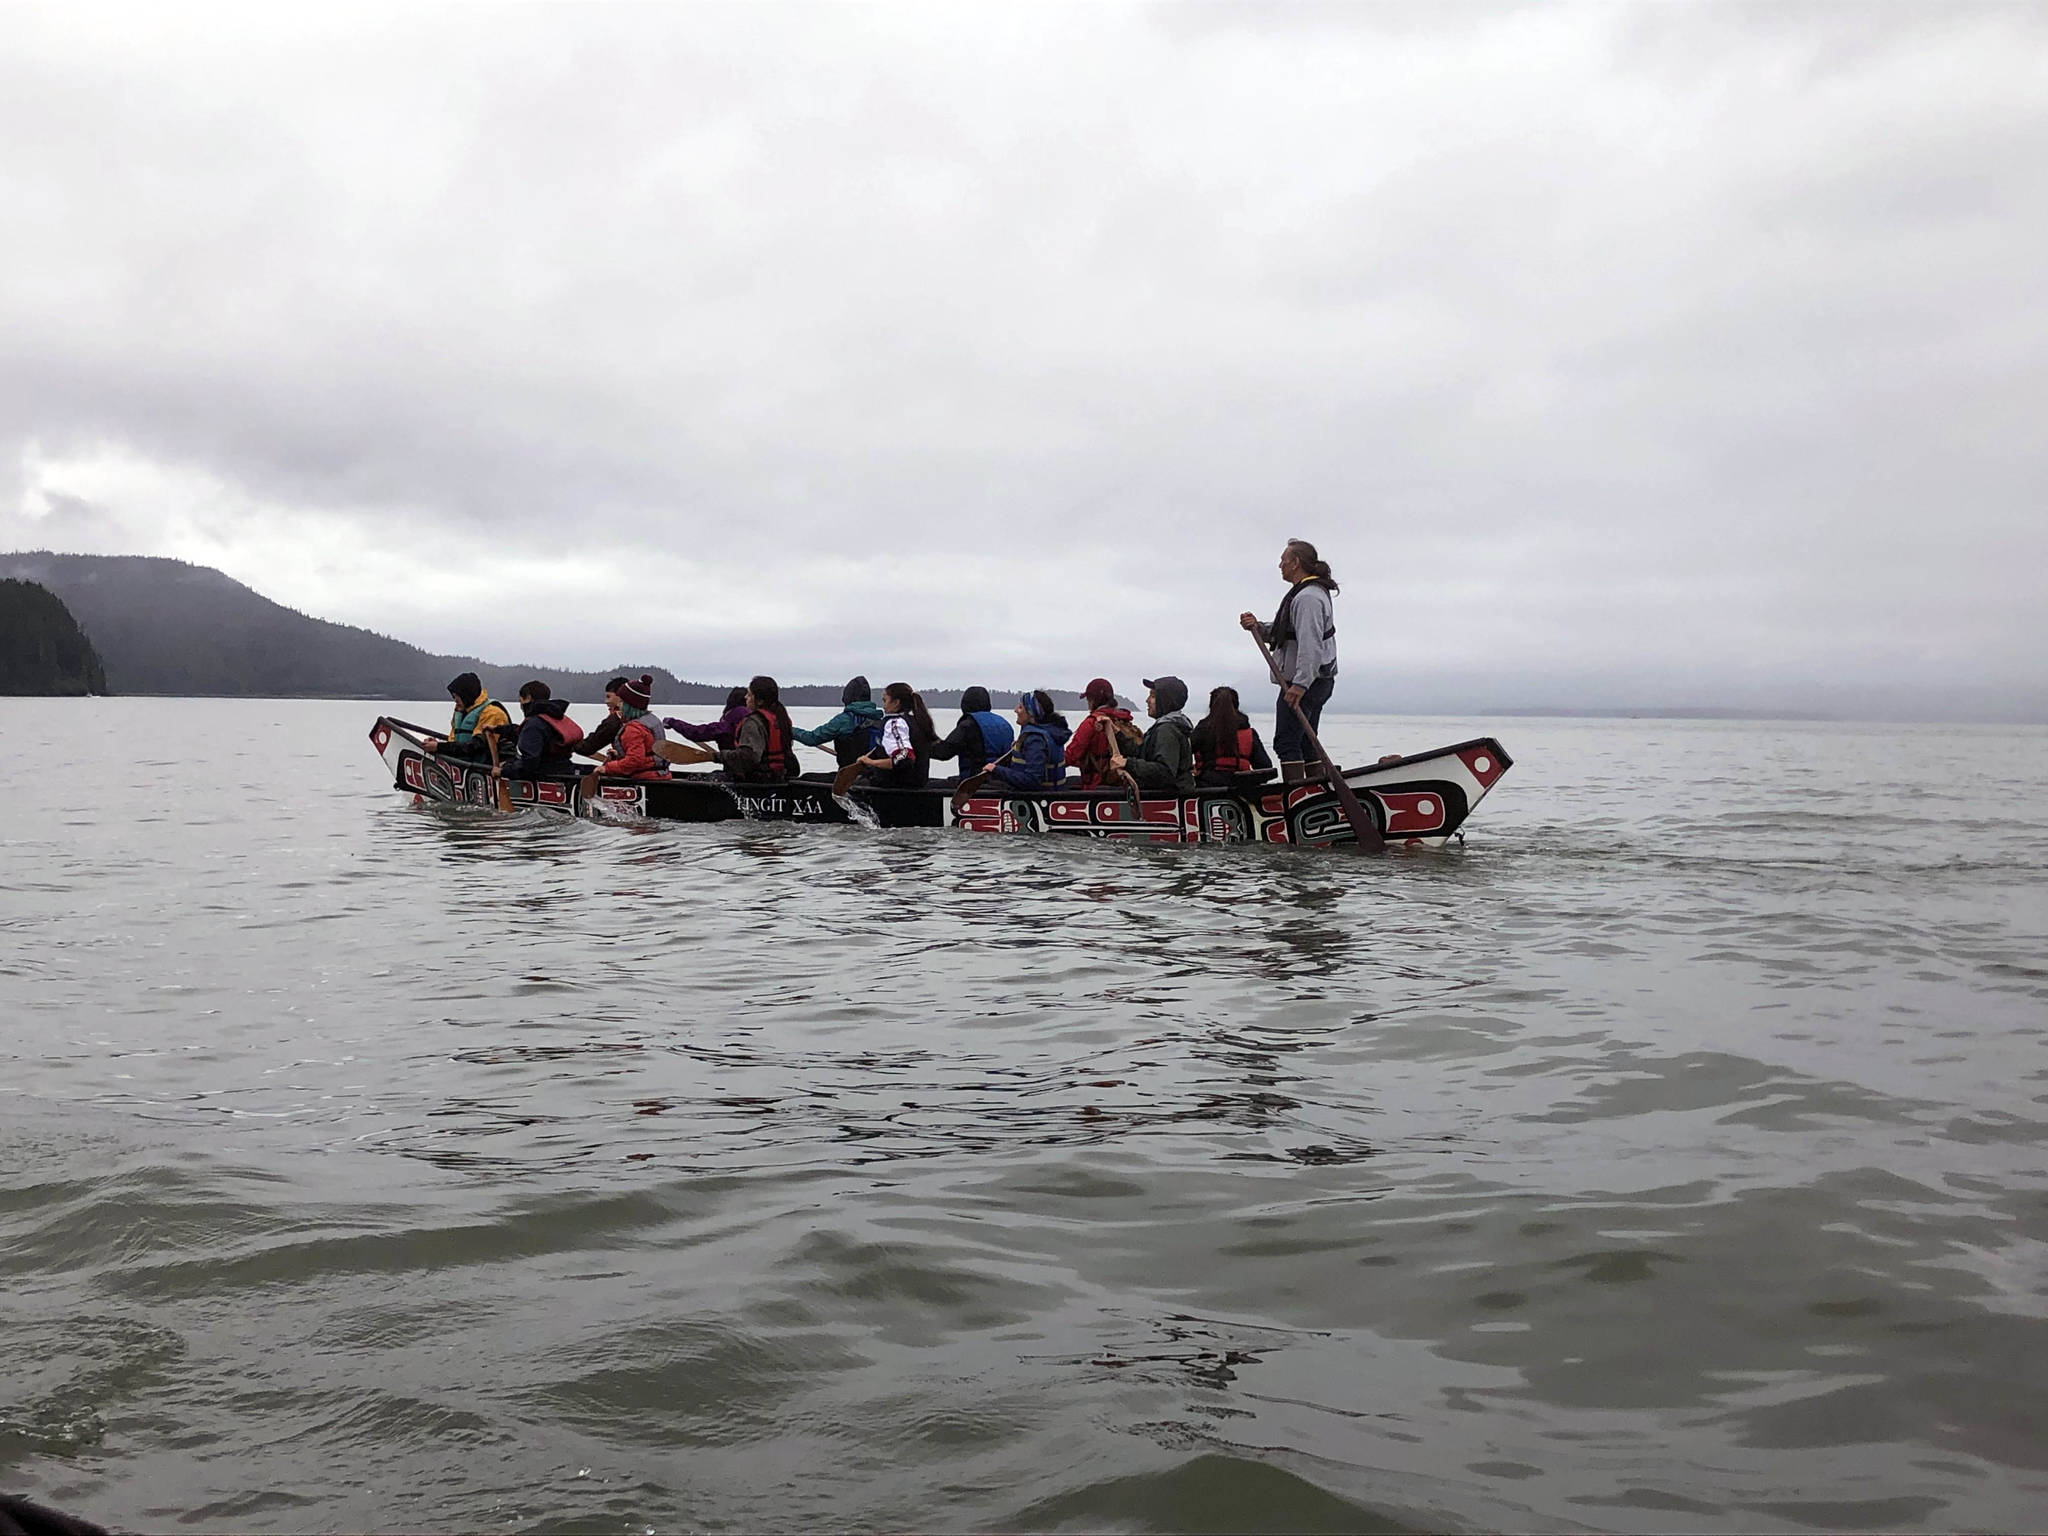 Two traditional Tlingit canoes powered by local students traversed 17.64 miles between Statter Harbor and Douglas Harbor on Friday, June 25, 2021. (Courtesy Photo/Chuck Seaca, Alaska Humanities Forum)